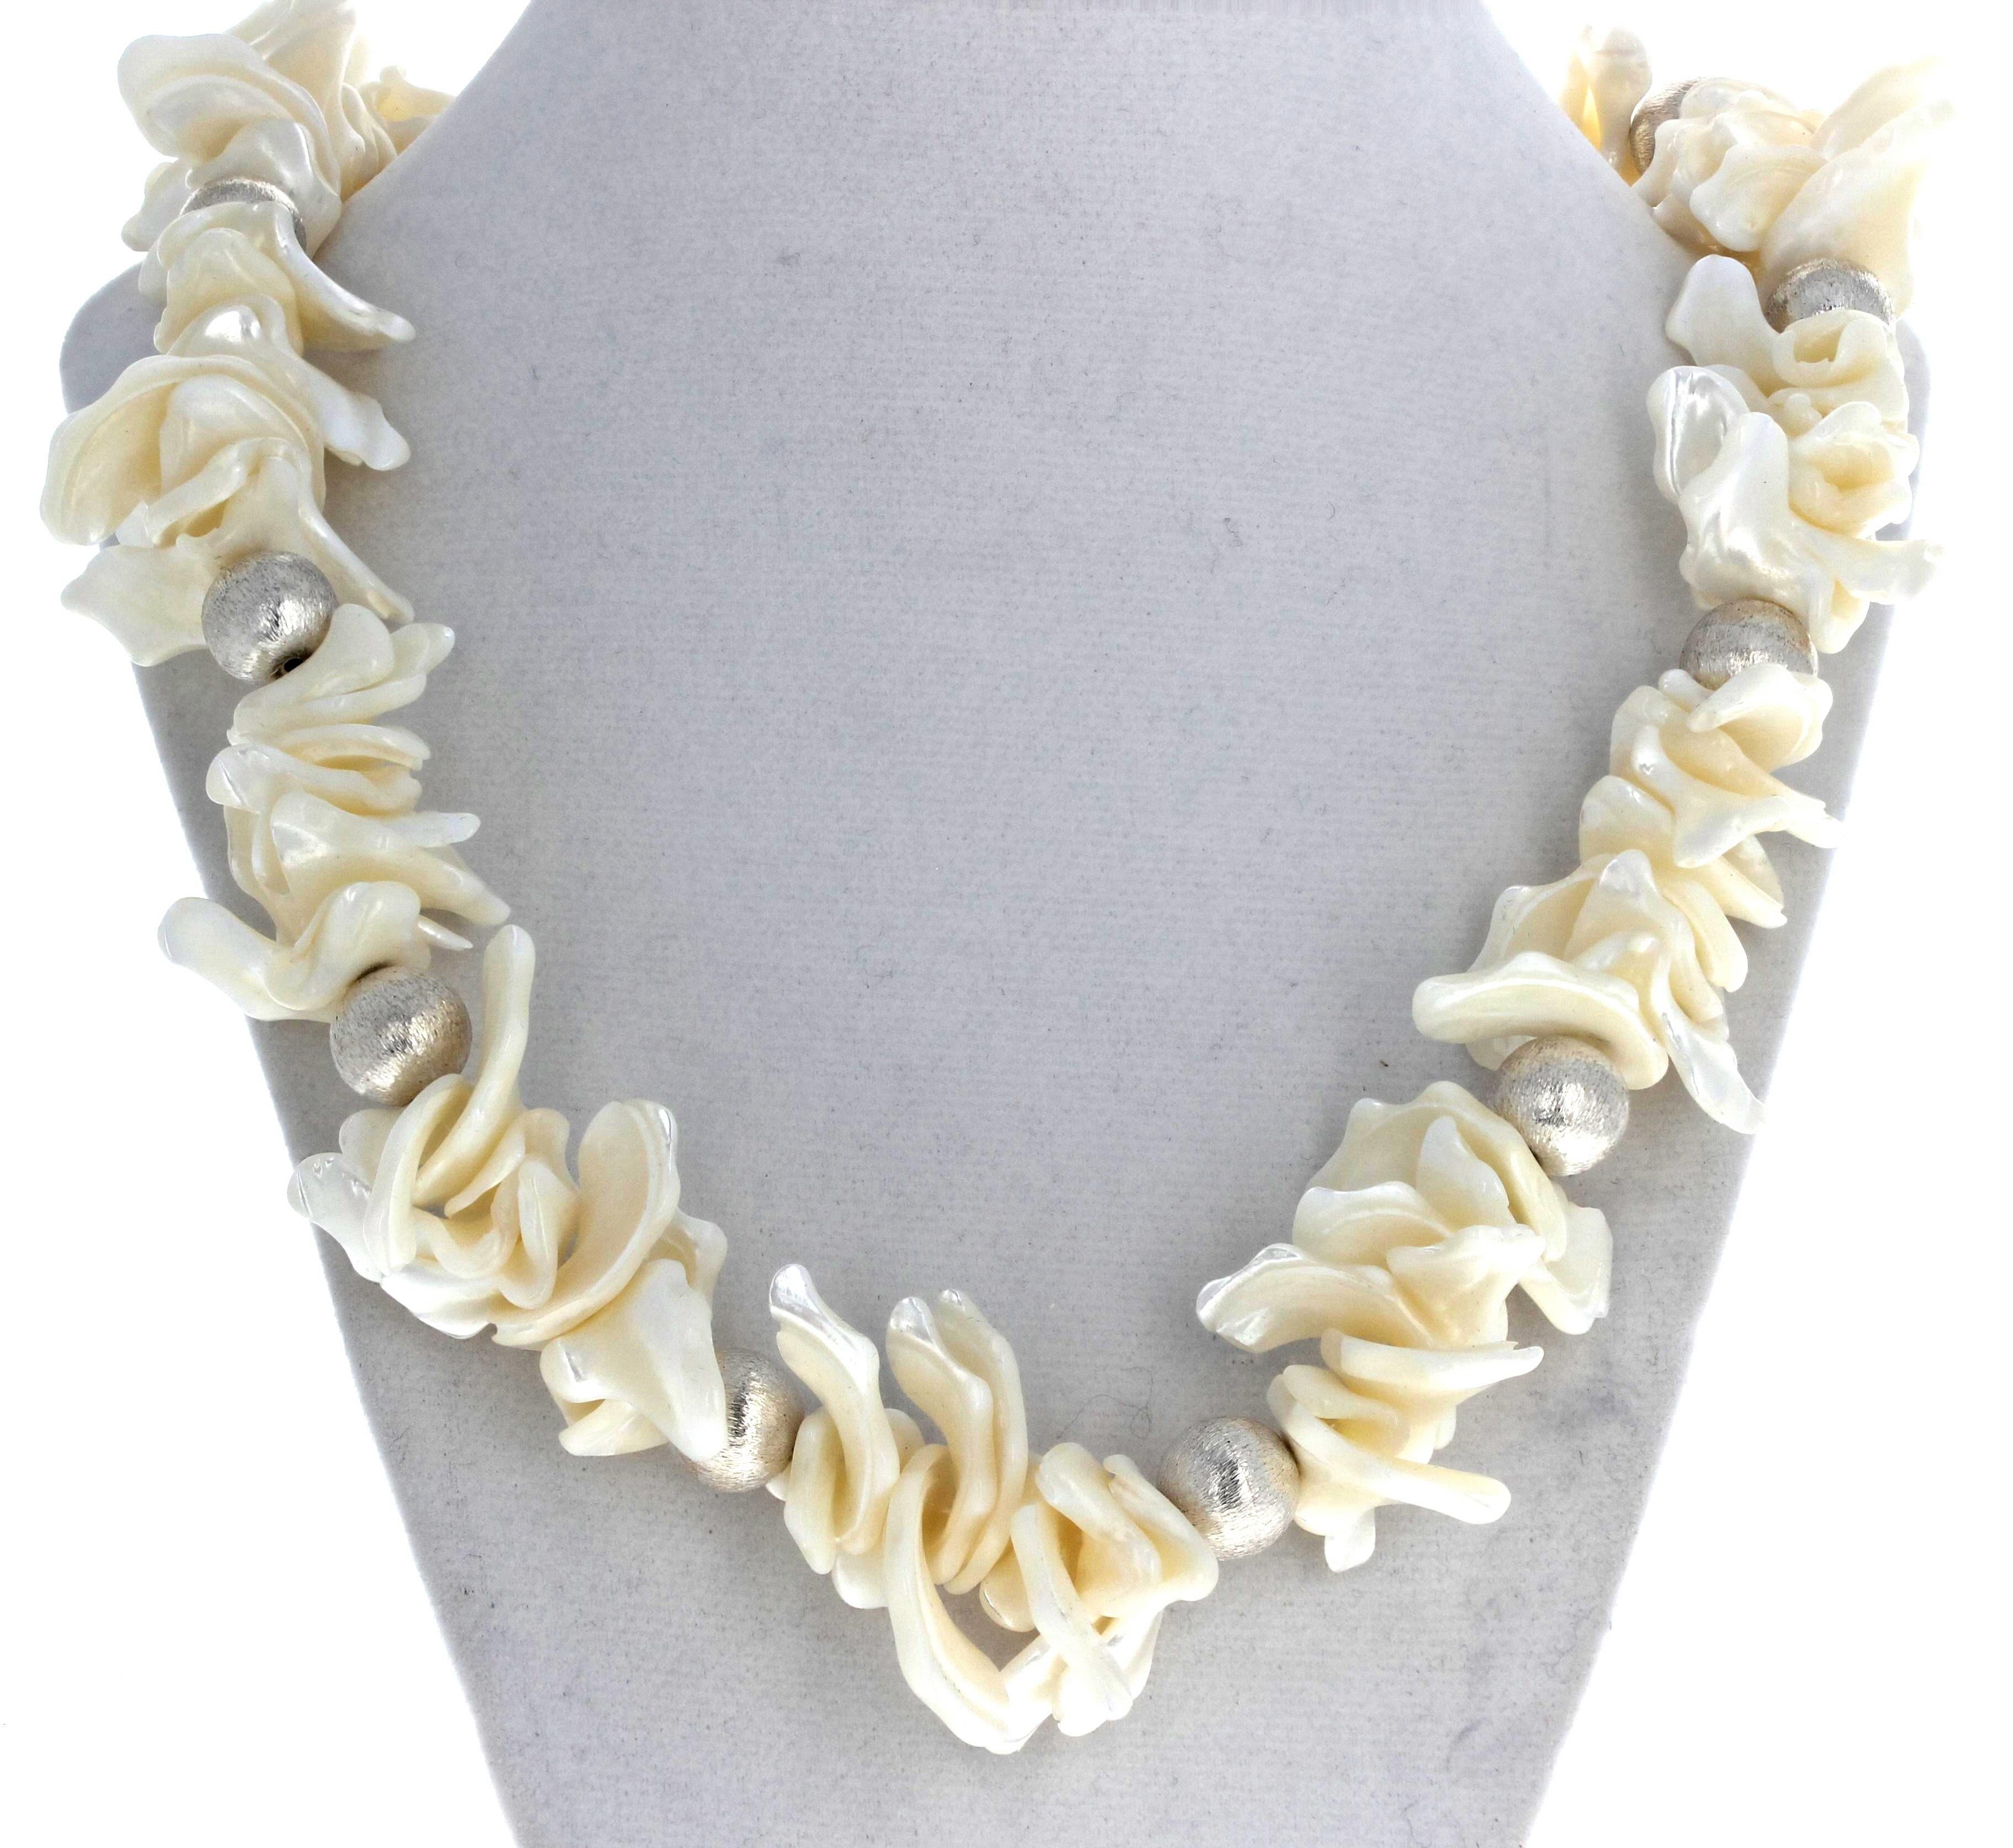 This fascinatingly beautiful natural Flip-Flop Pearl necklace is 21 1/2 inches long.  The Silver plated rondels enhance the drama of these extraordinary Pearl pieces.  The largest flipflops are approximately 1 1/2inches long and the silver plated